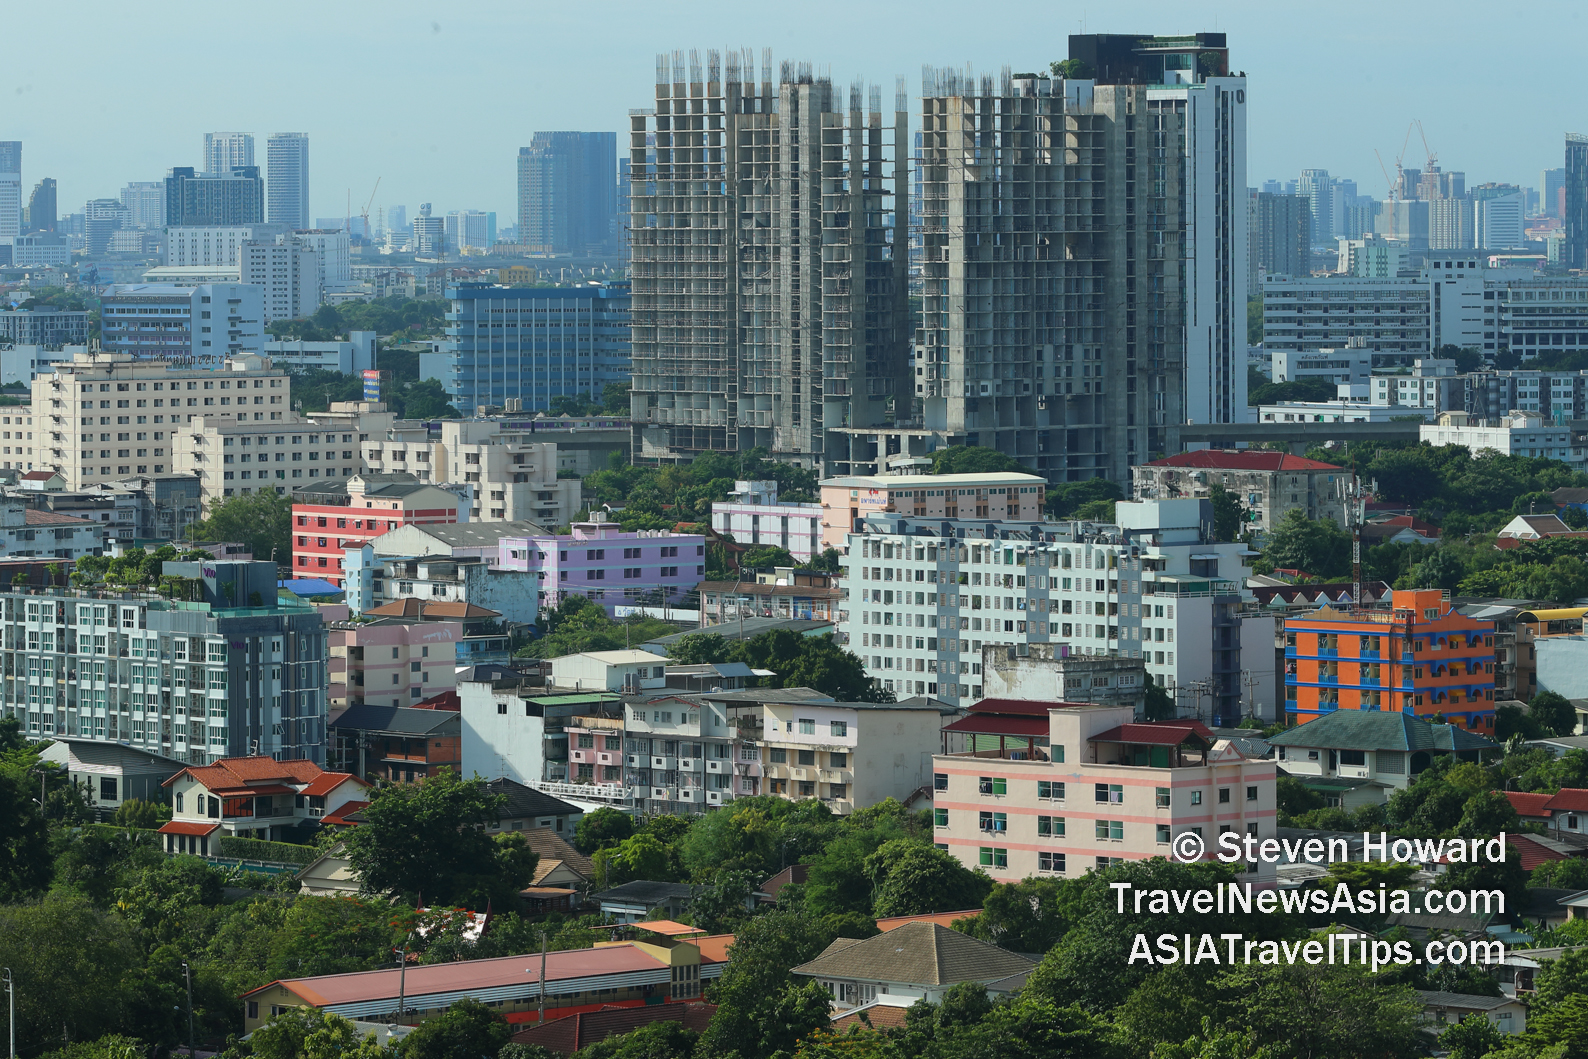 Part of Greater Bangkok, Thailand in August 2021. Picture by Steven Howard of TravelNewsAsia.com Click to enlarge.